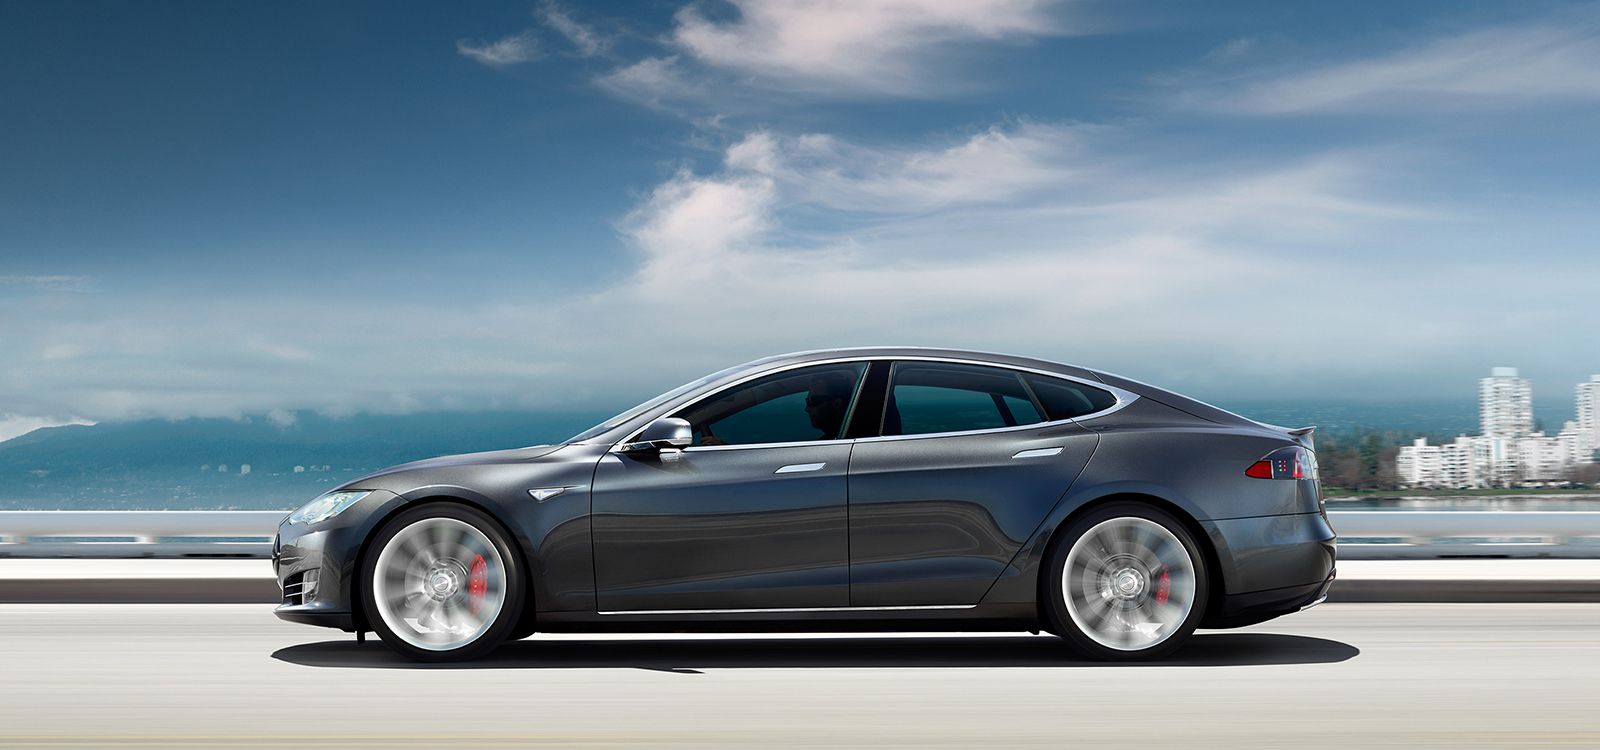 tesla model s for 2016 what to expect from the newest electric supercar image 1